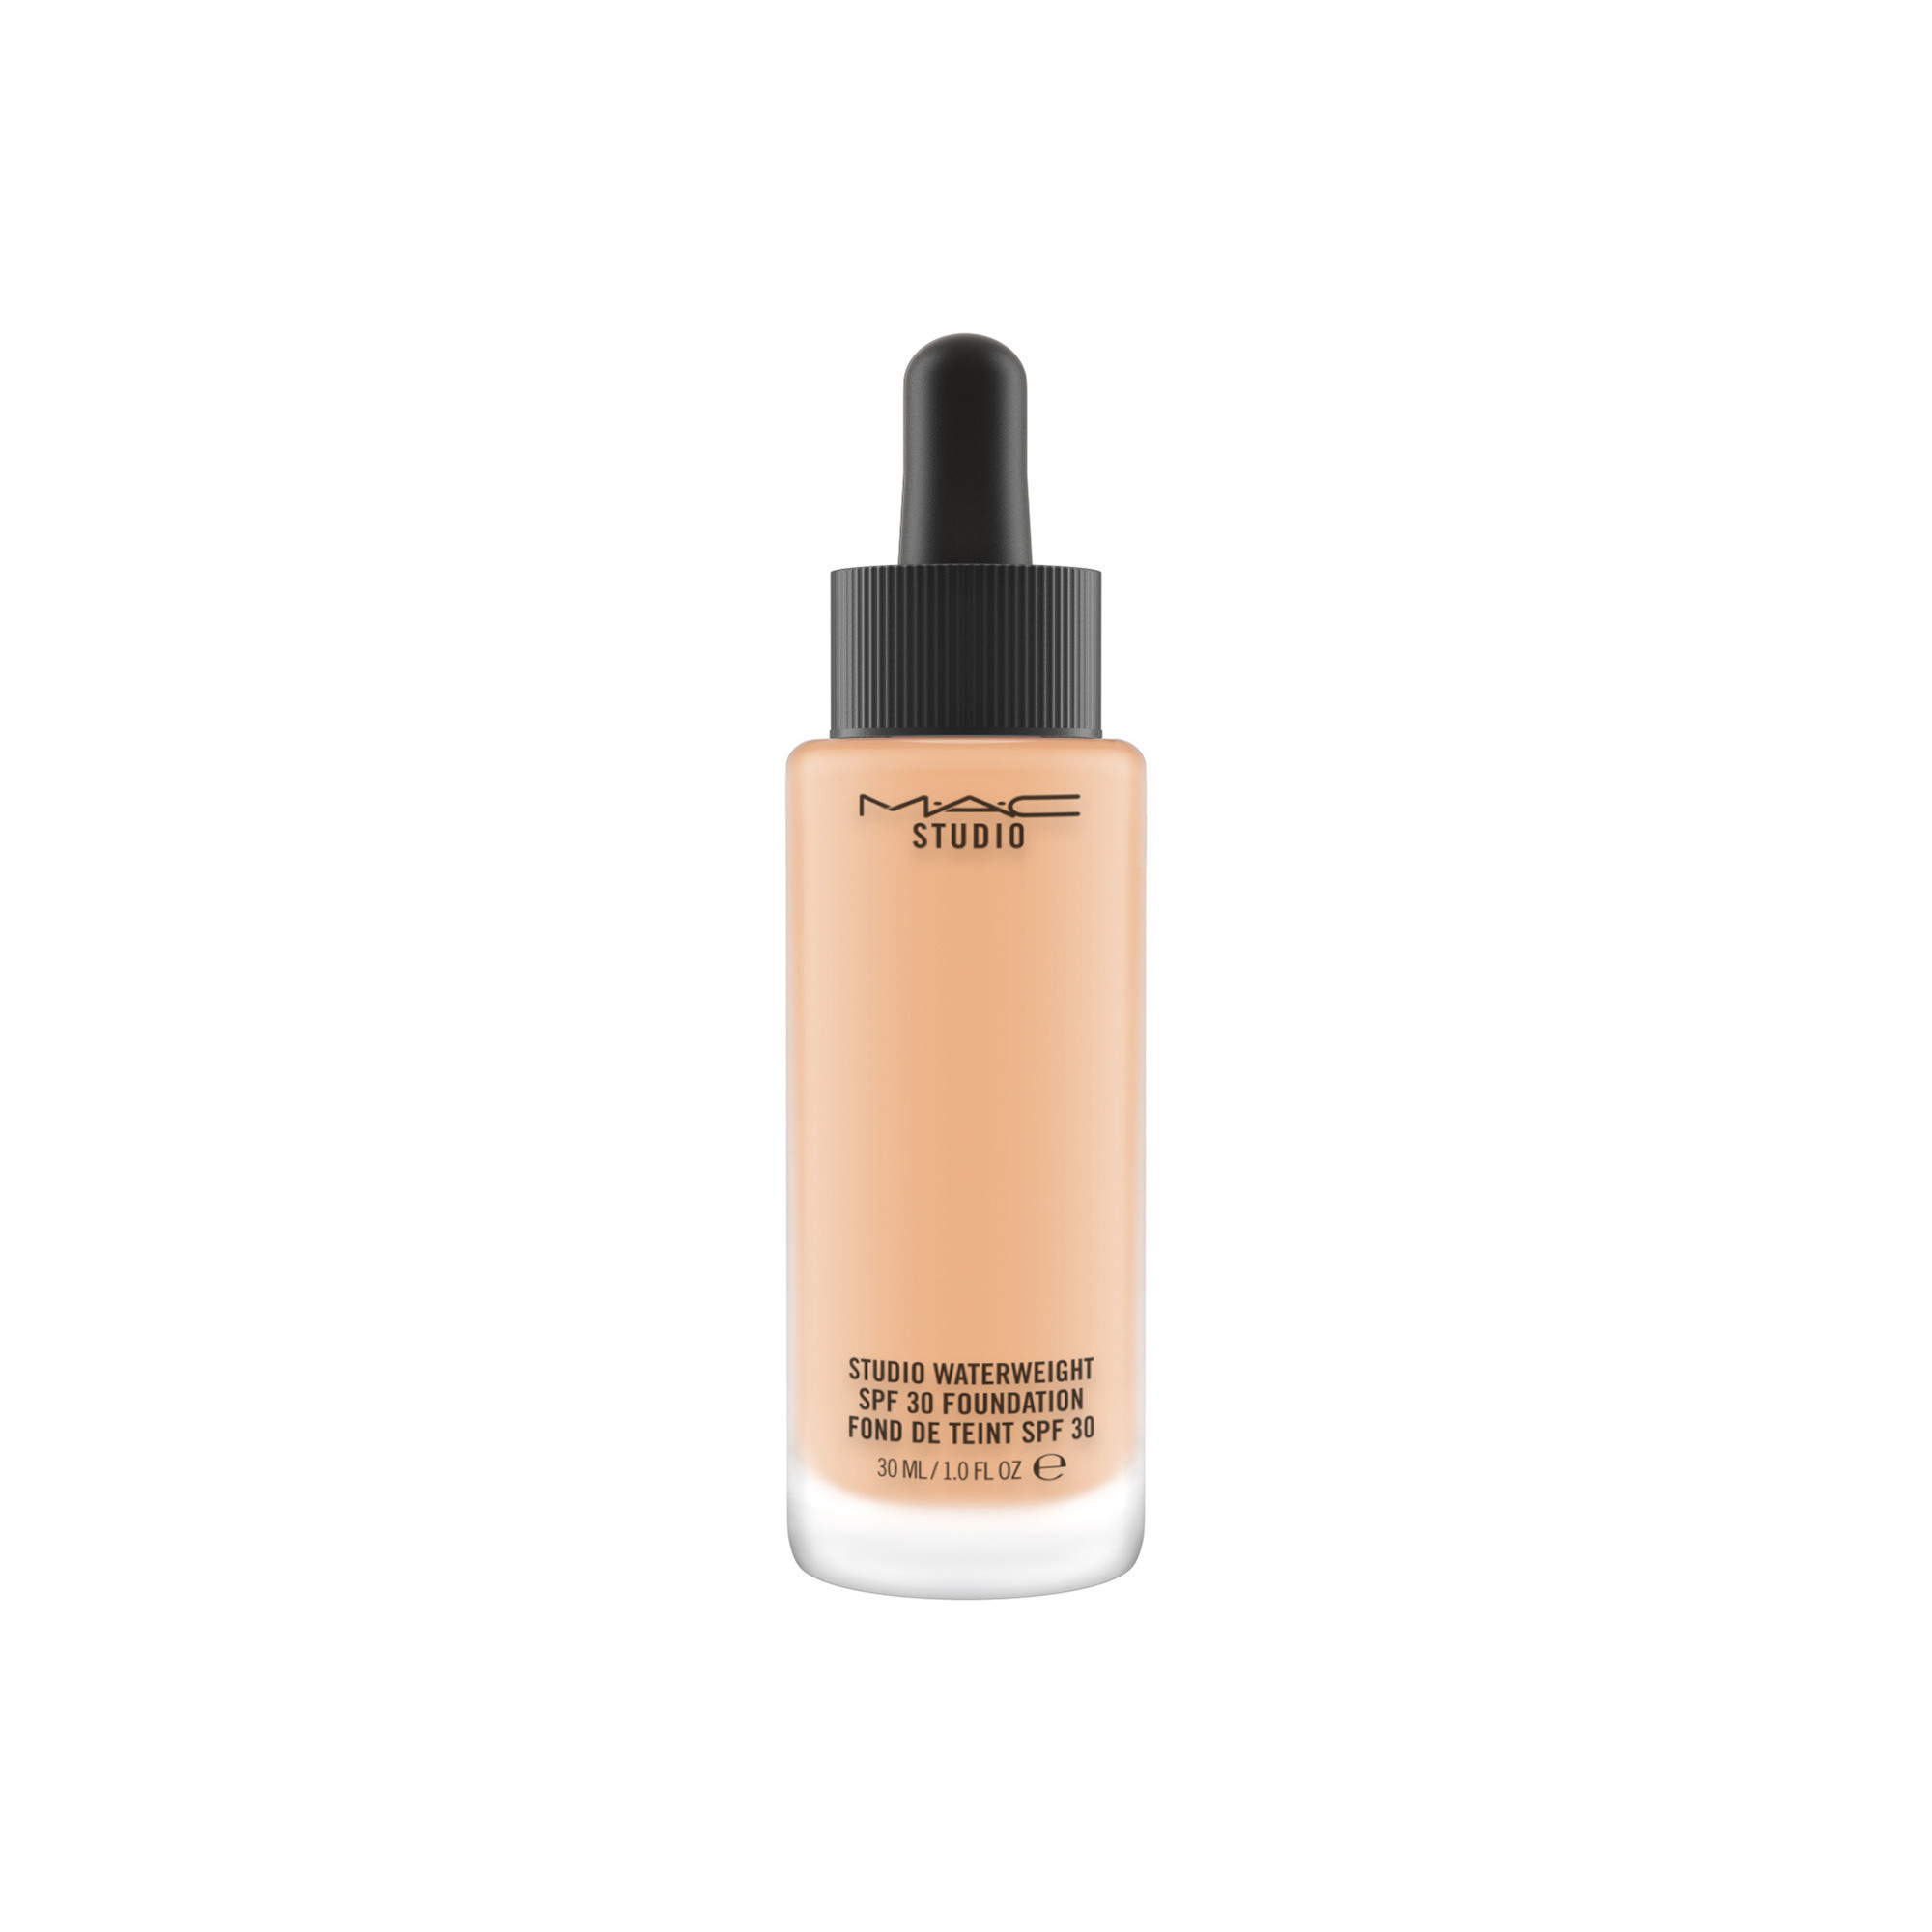 Studio Waterweight Foundation Spf30 - NC30, NC30, large image number 0